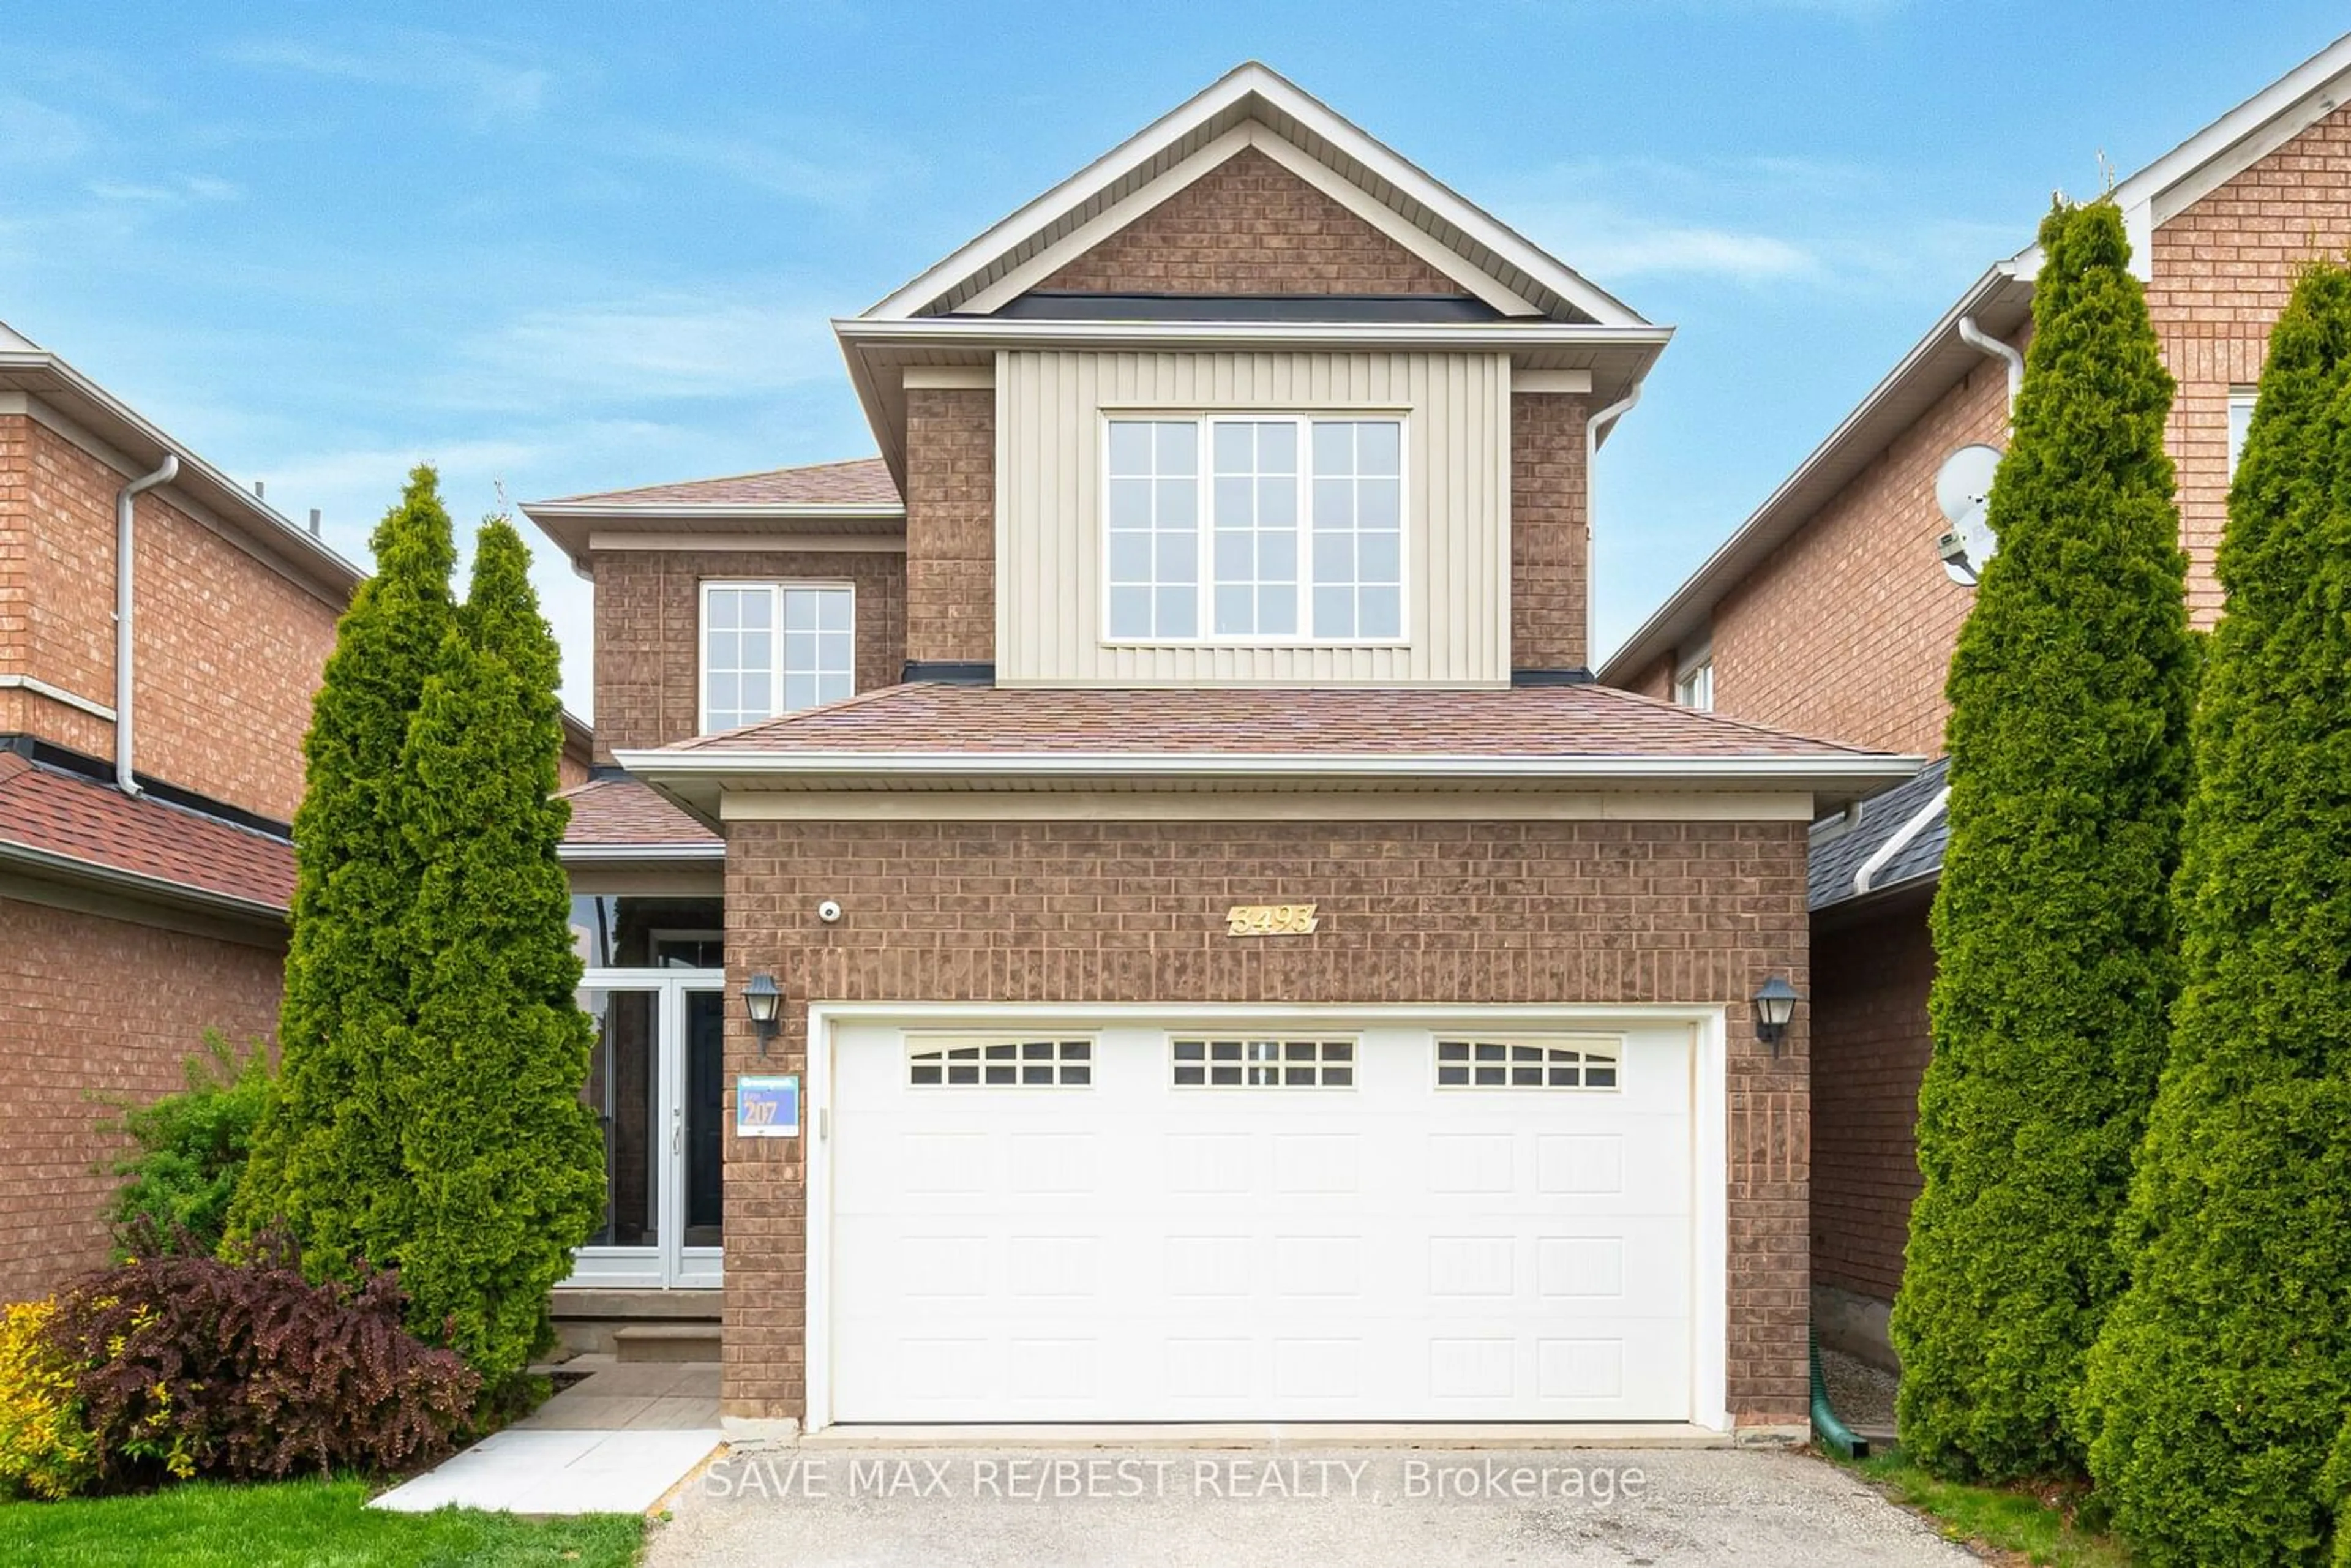 Home with brick exterior material for 3493 Mcdowell Dr, Mississauga Ontario L5M 6R6